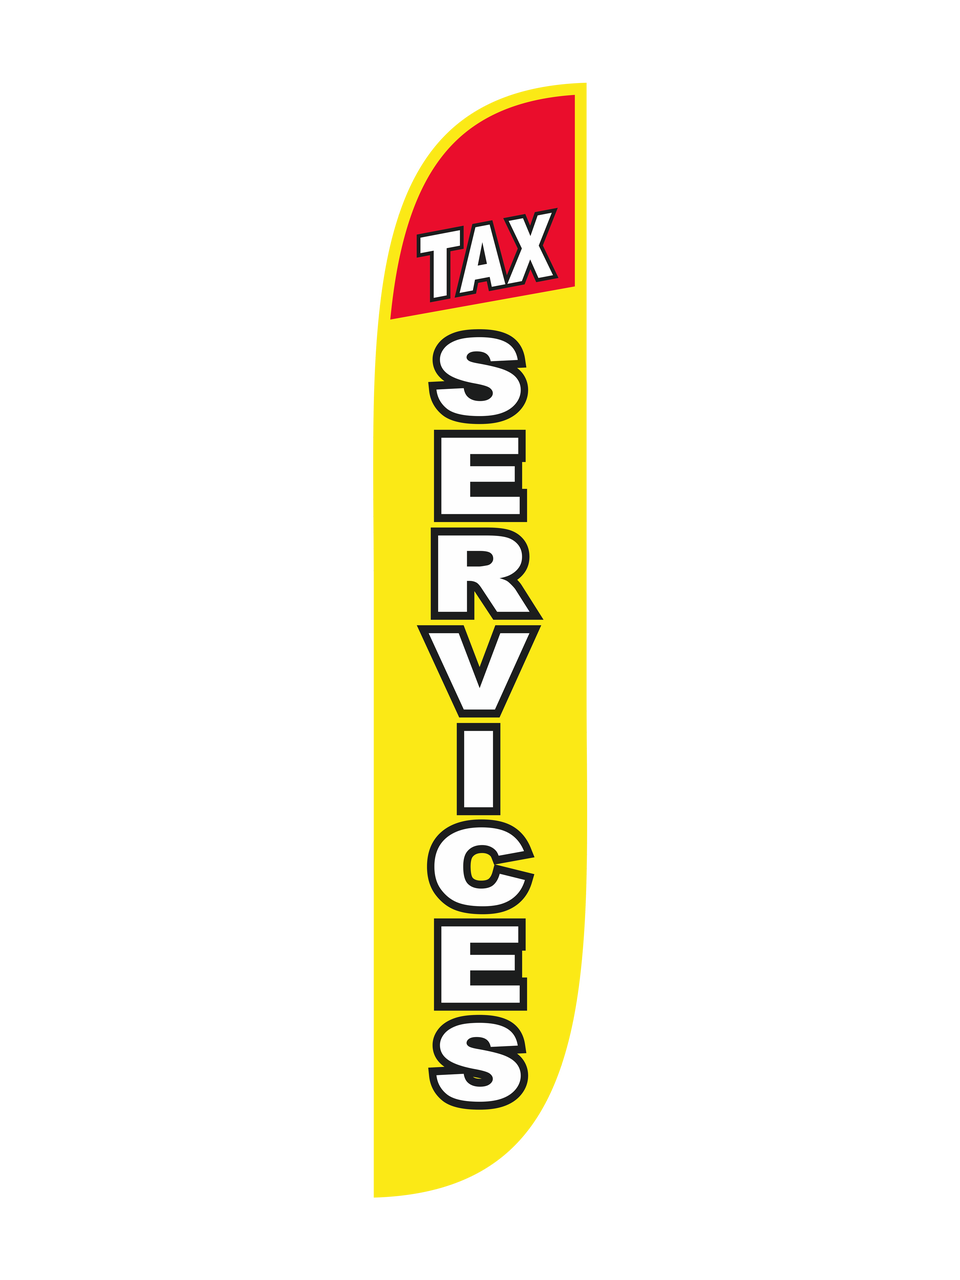 12ft Tax Services Feather Flag in Yellow